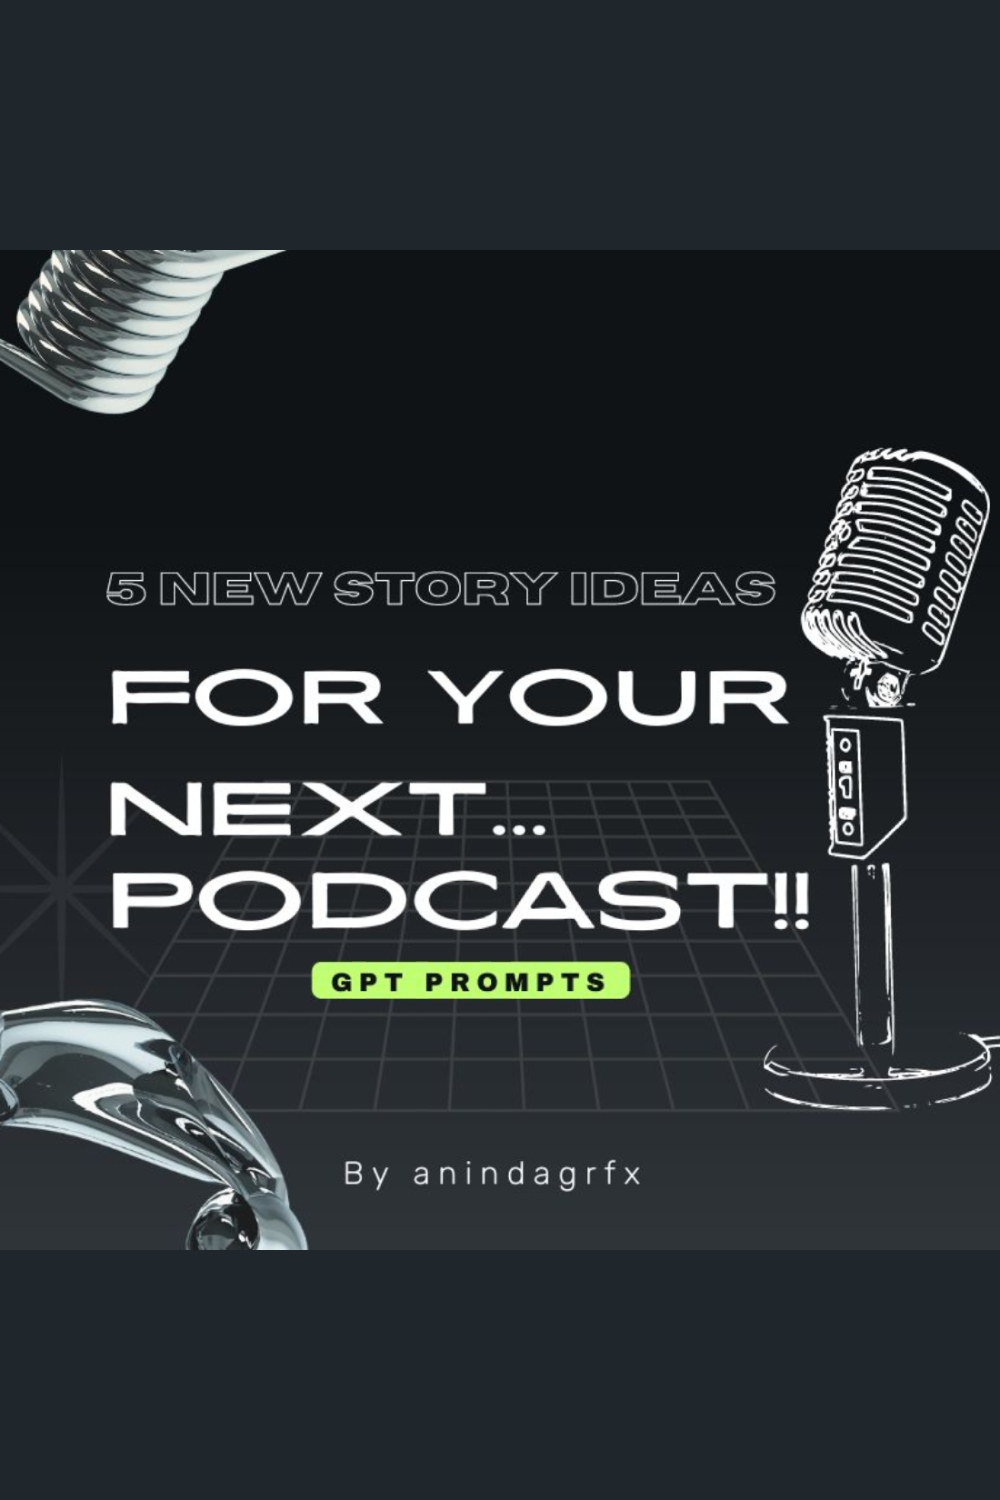 5 New Story Ideas for your next podcast GPT prompts pinterest preview image.